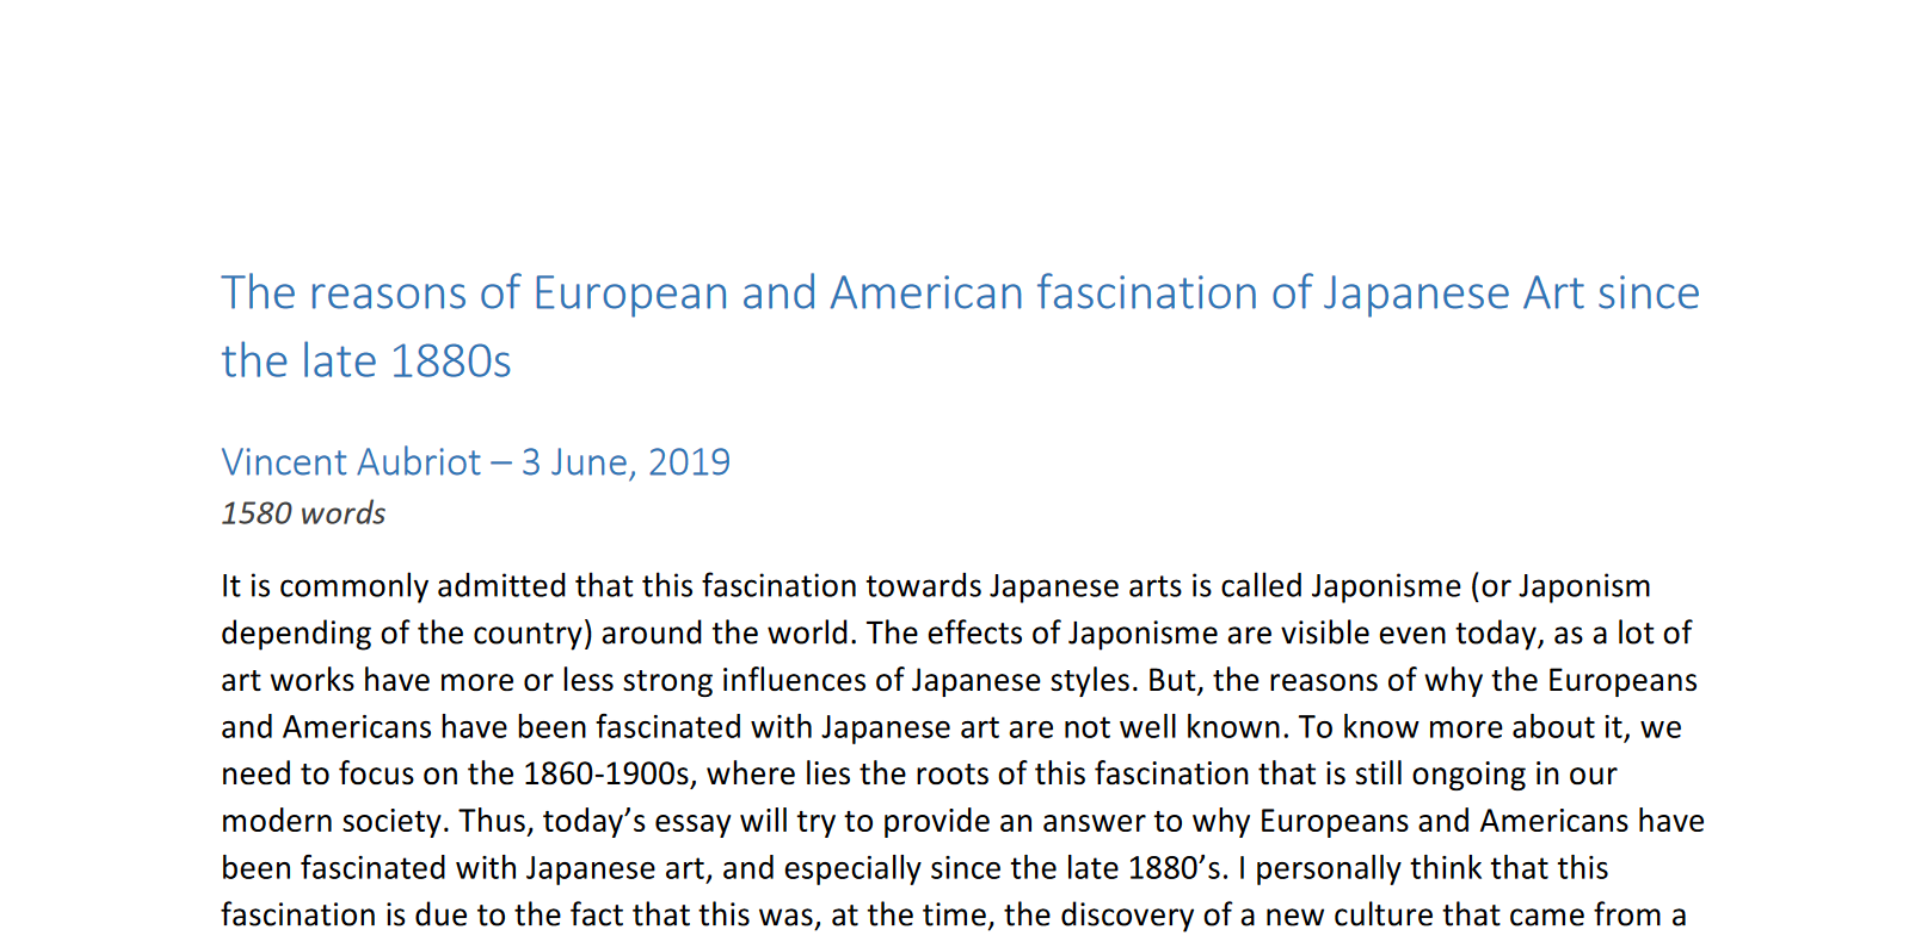 Essai - The reasons of European and American fascination of Japanese Art since the late 1880s - 2019